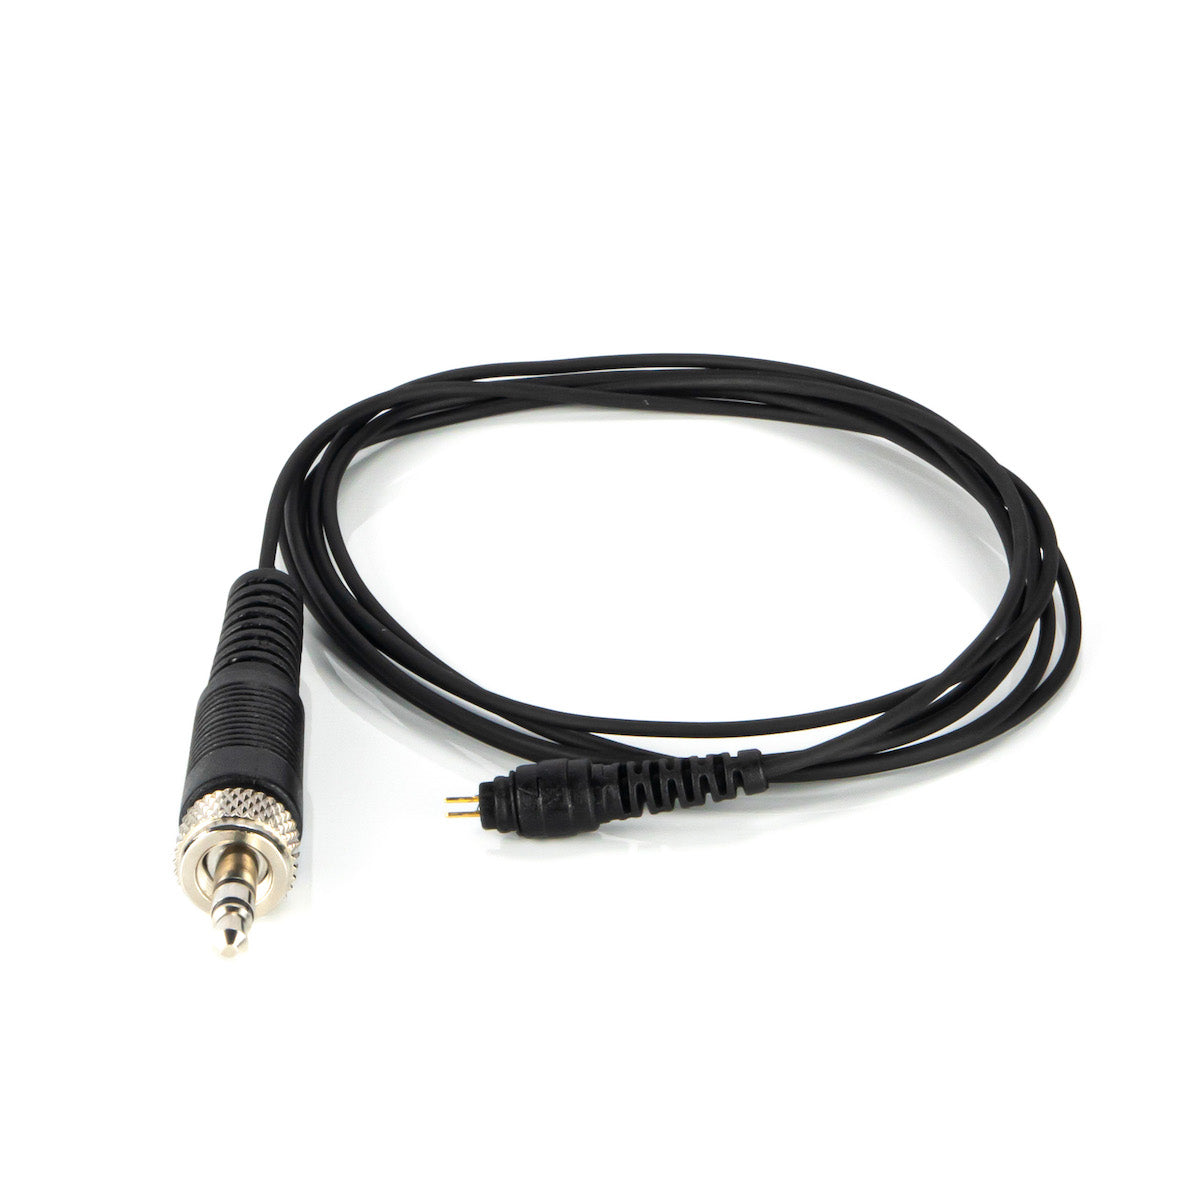 THOR Hammer SE Microphone Replacement Cable, 3.5mm black